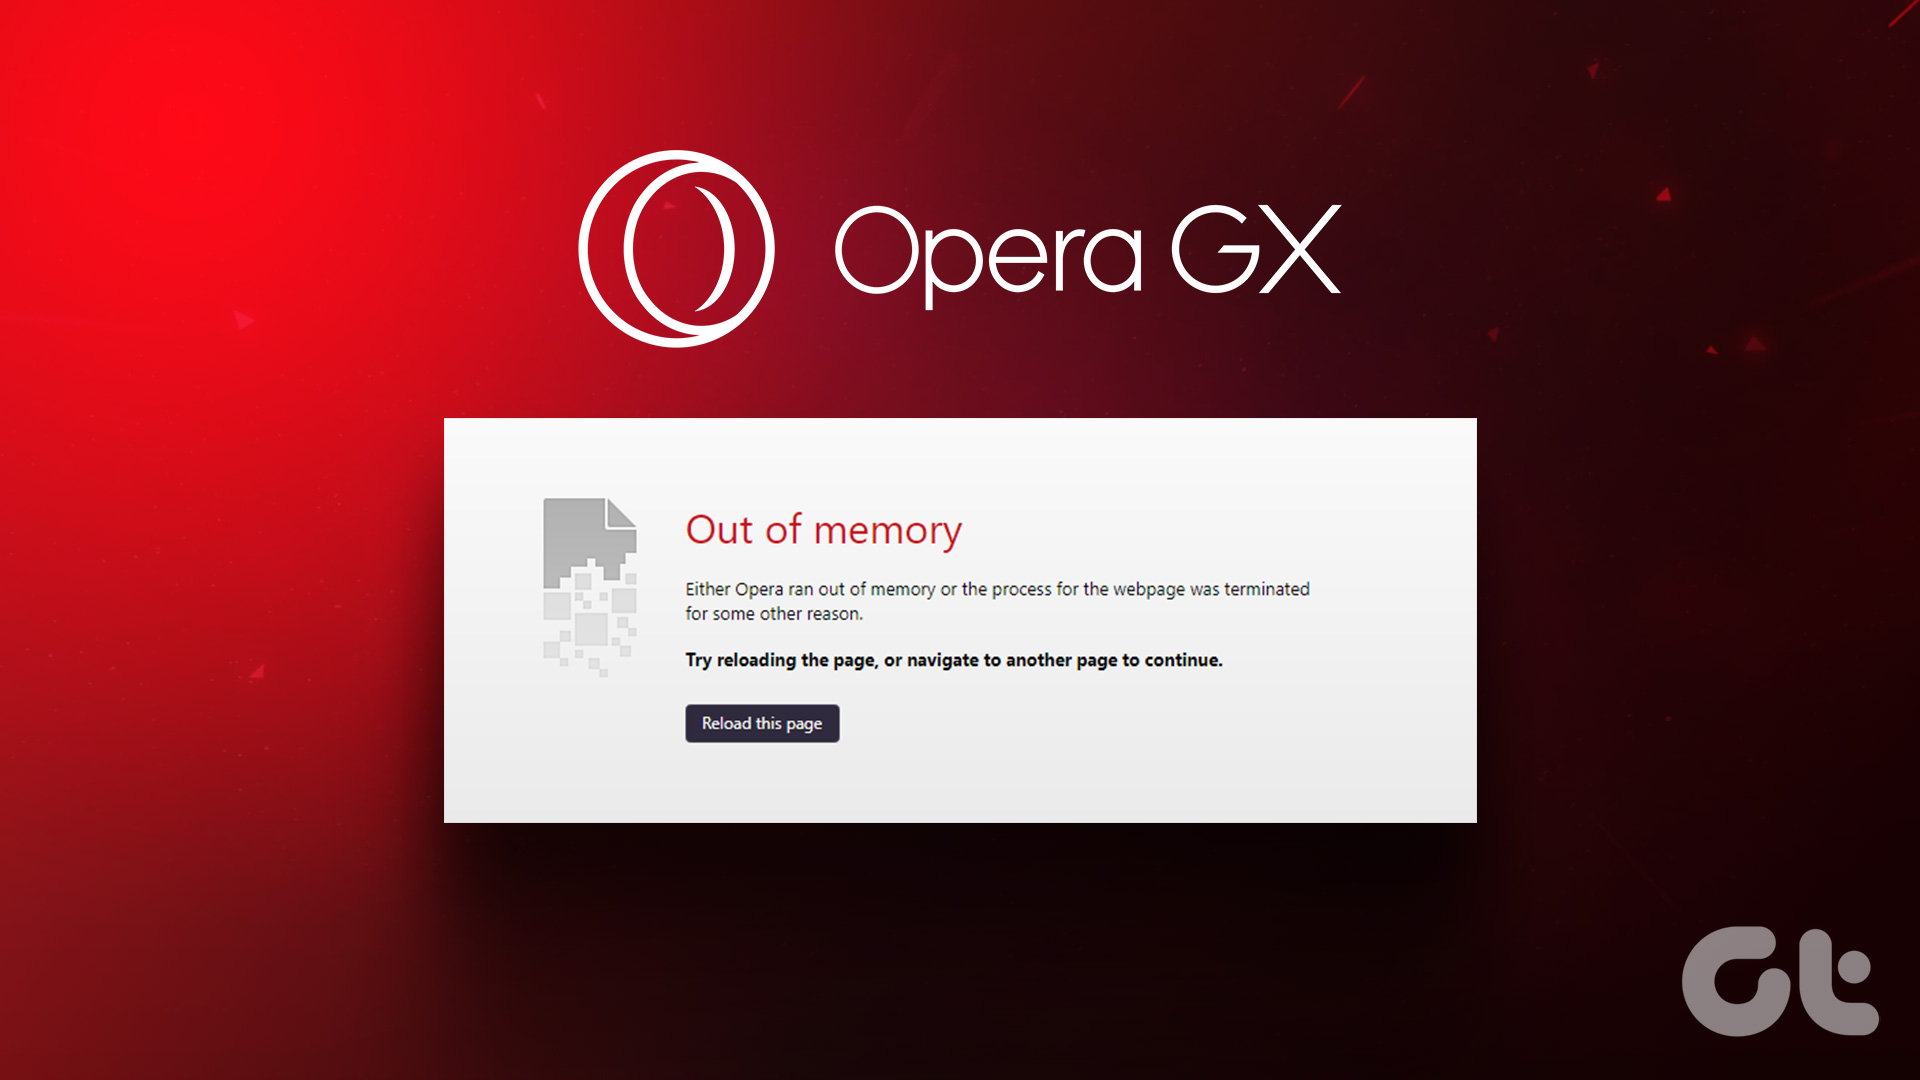 How to Limit RAM Usage in Opera GX